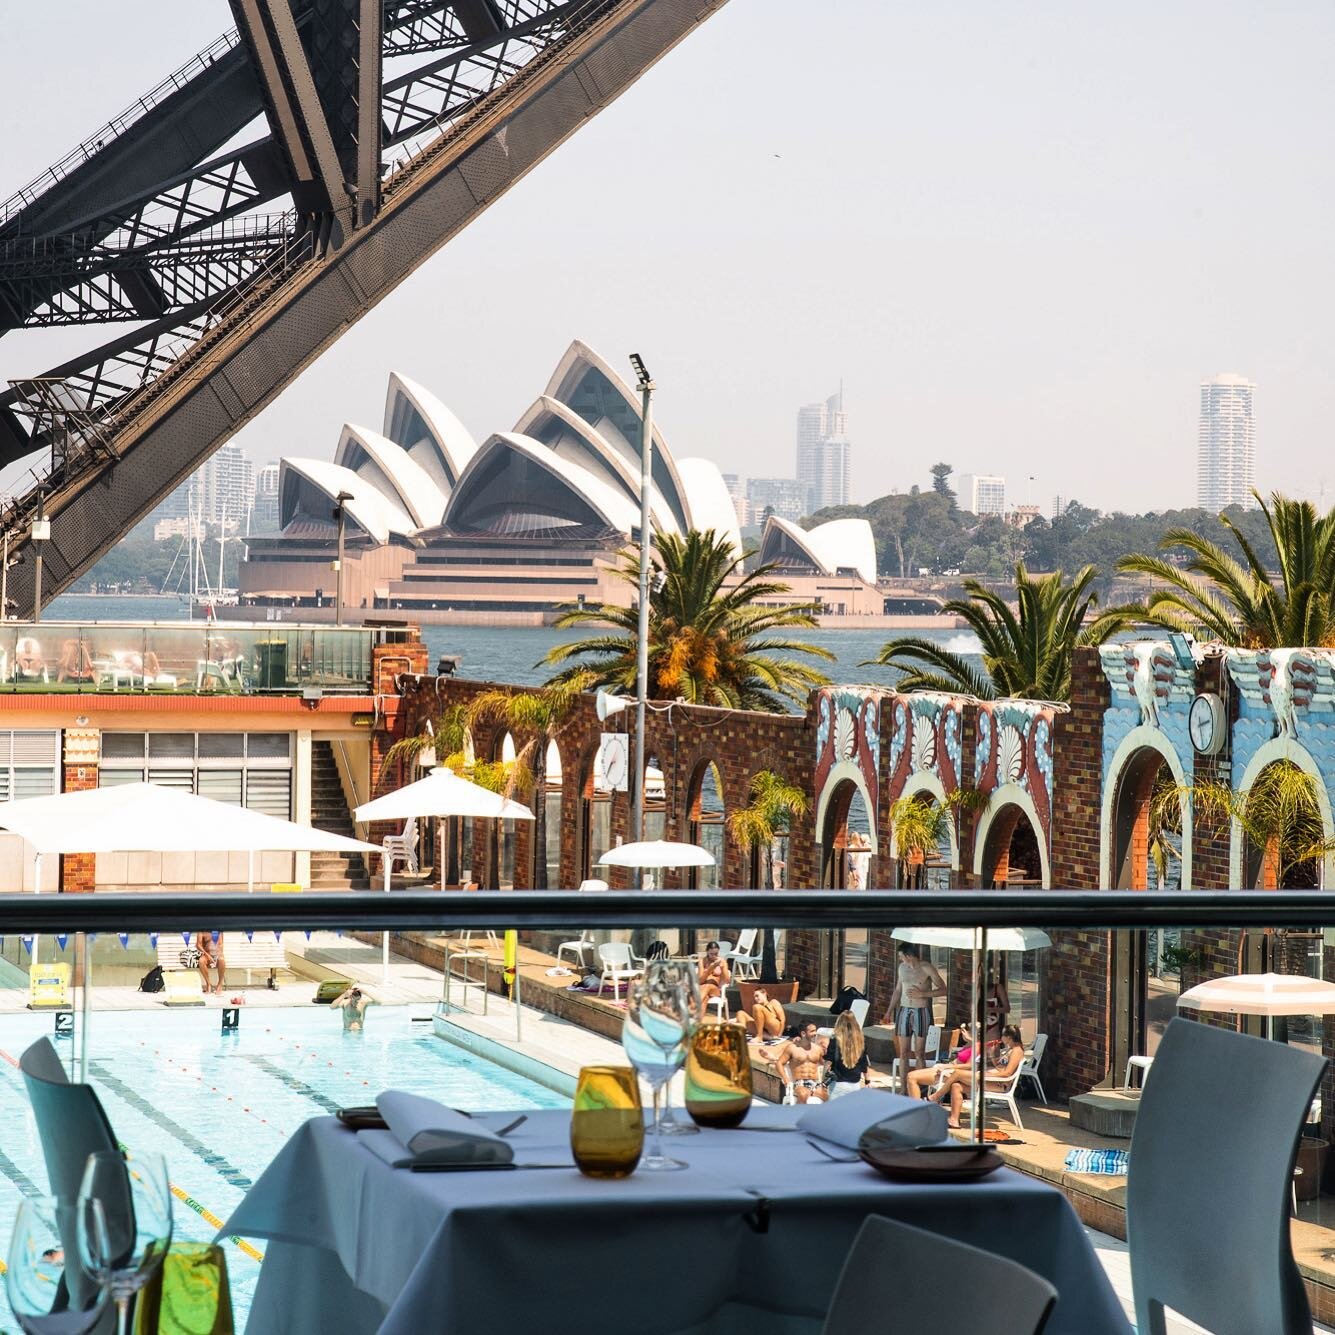 Monday&rsquo;s don&rsquo;t get any better than this!

#sydneydining #views #summer #sydneylife